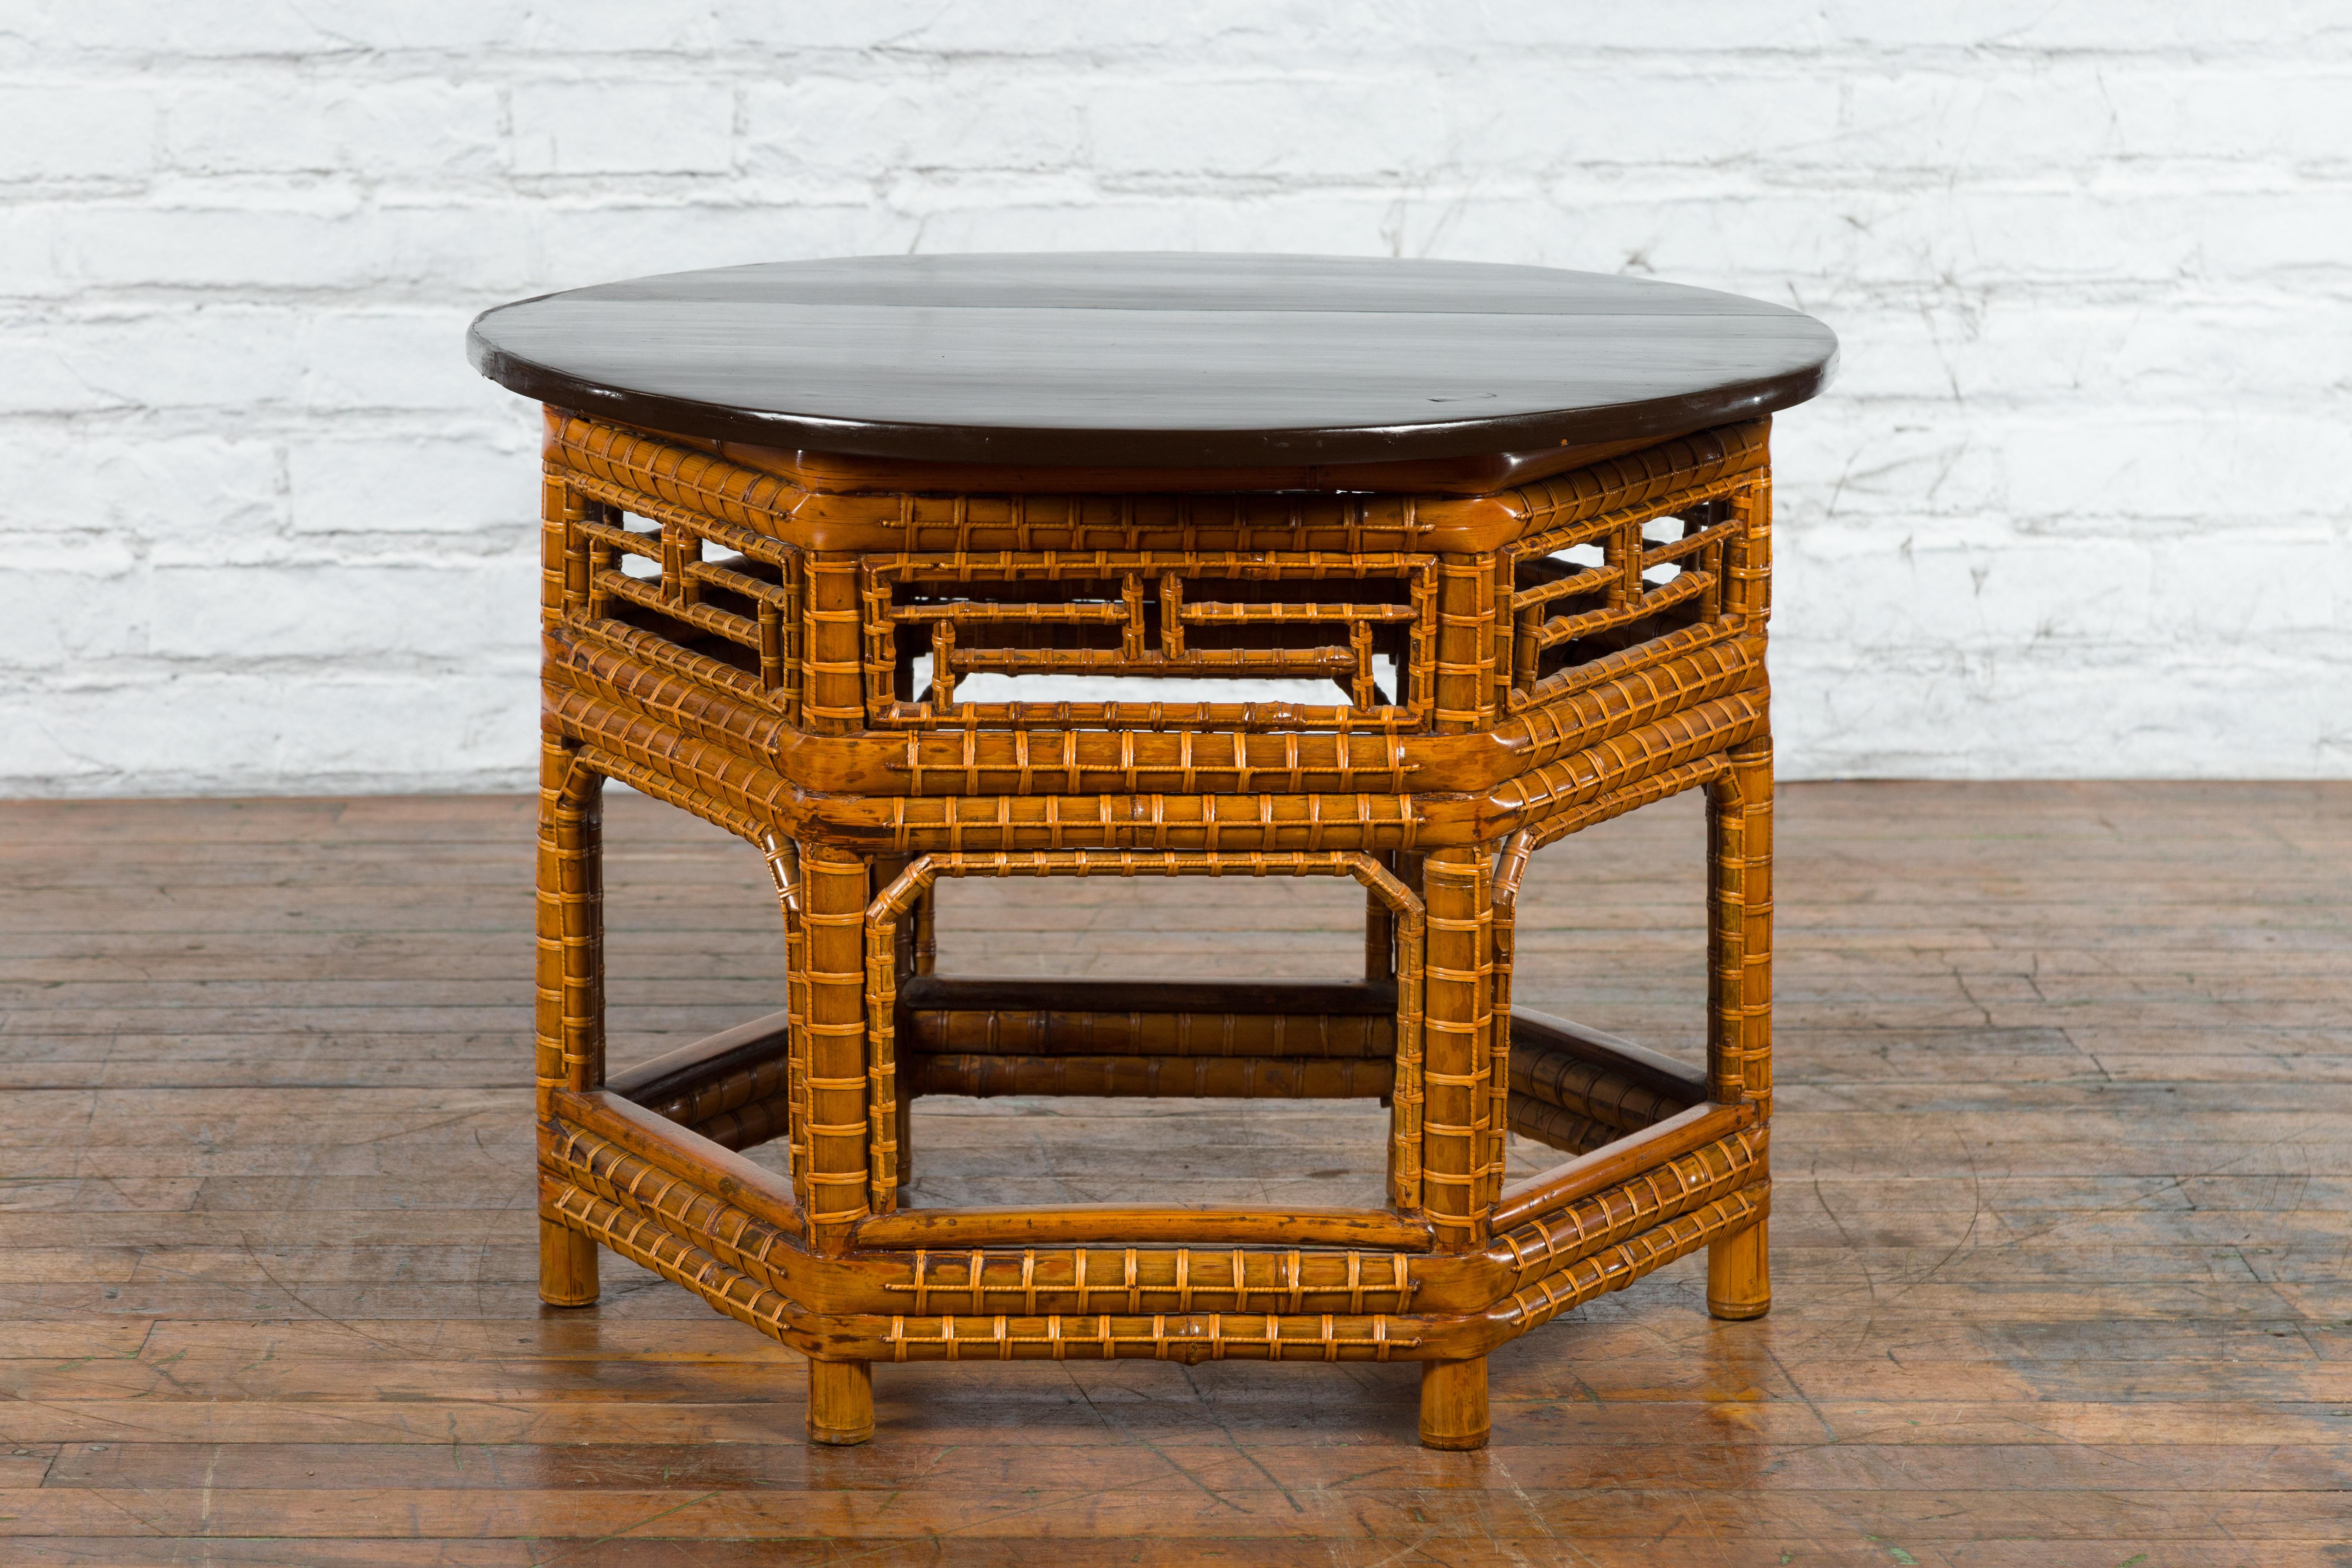 A Chinese Qing Dynasty period coffee table from the 19th century, with black lacquered elm wood top, hexagonal bamboo base and fretwork design. Created in China during the Qing Dynasty in the 19th century, this coffee table features a circular elm